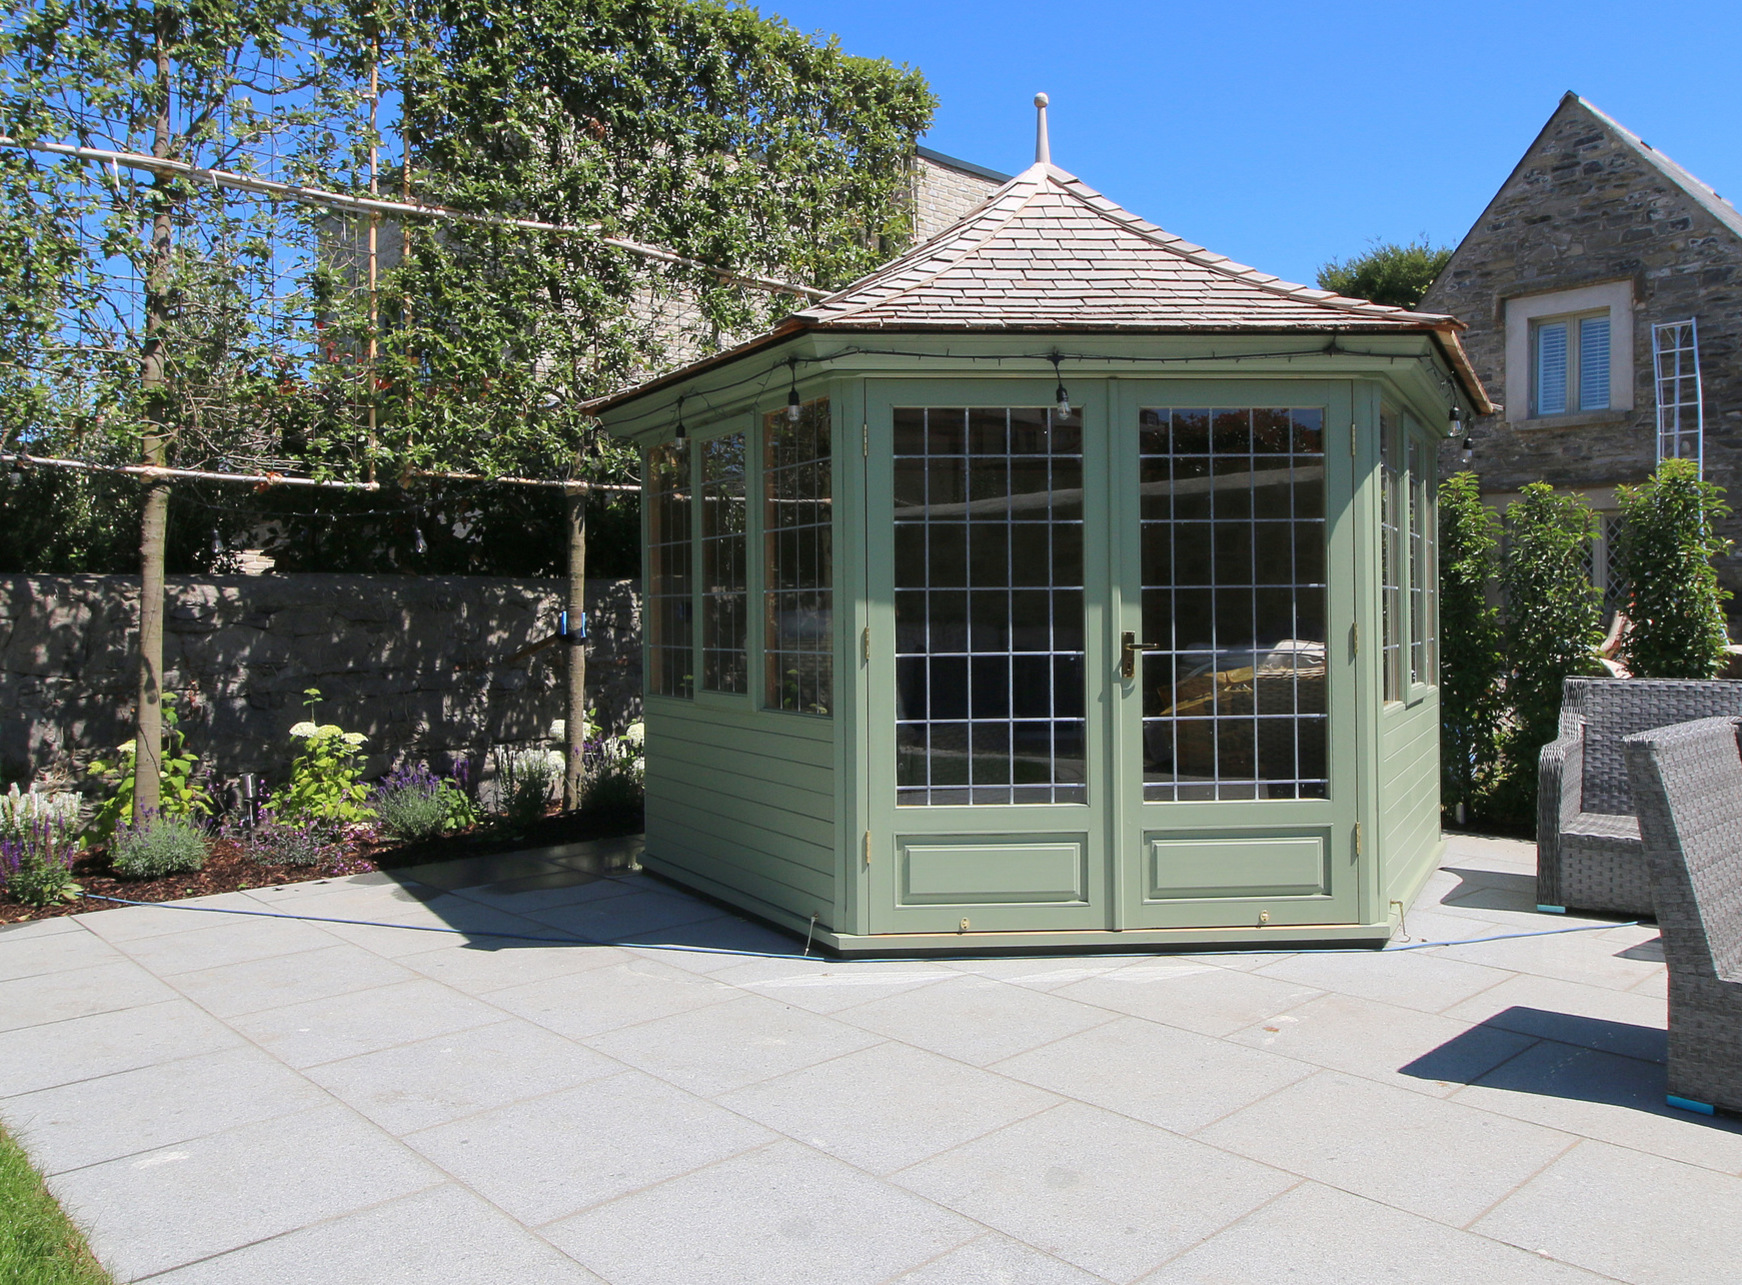 Stunning Victorian Garden Summerhouse, 3.0m diameter, six sided, Western Red Cedar with painted finish |  Supplied + Fitted in Dublin 6, by Owen Chubb Garden Landscapes Limited. Tel 087-2306 128